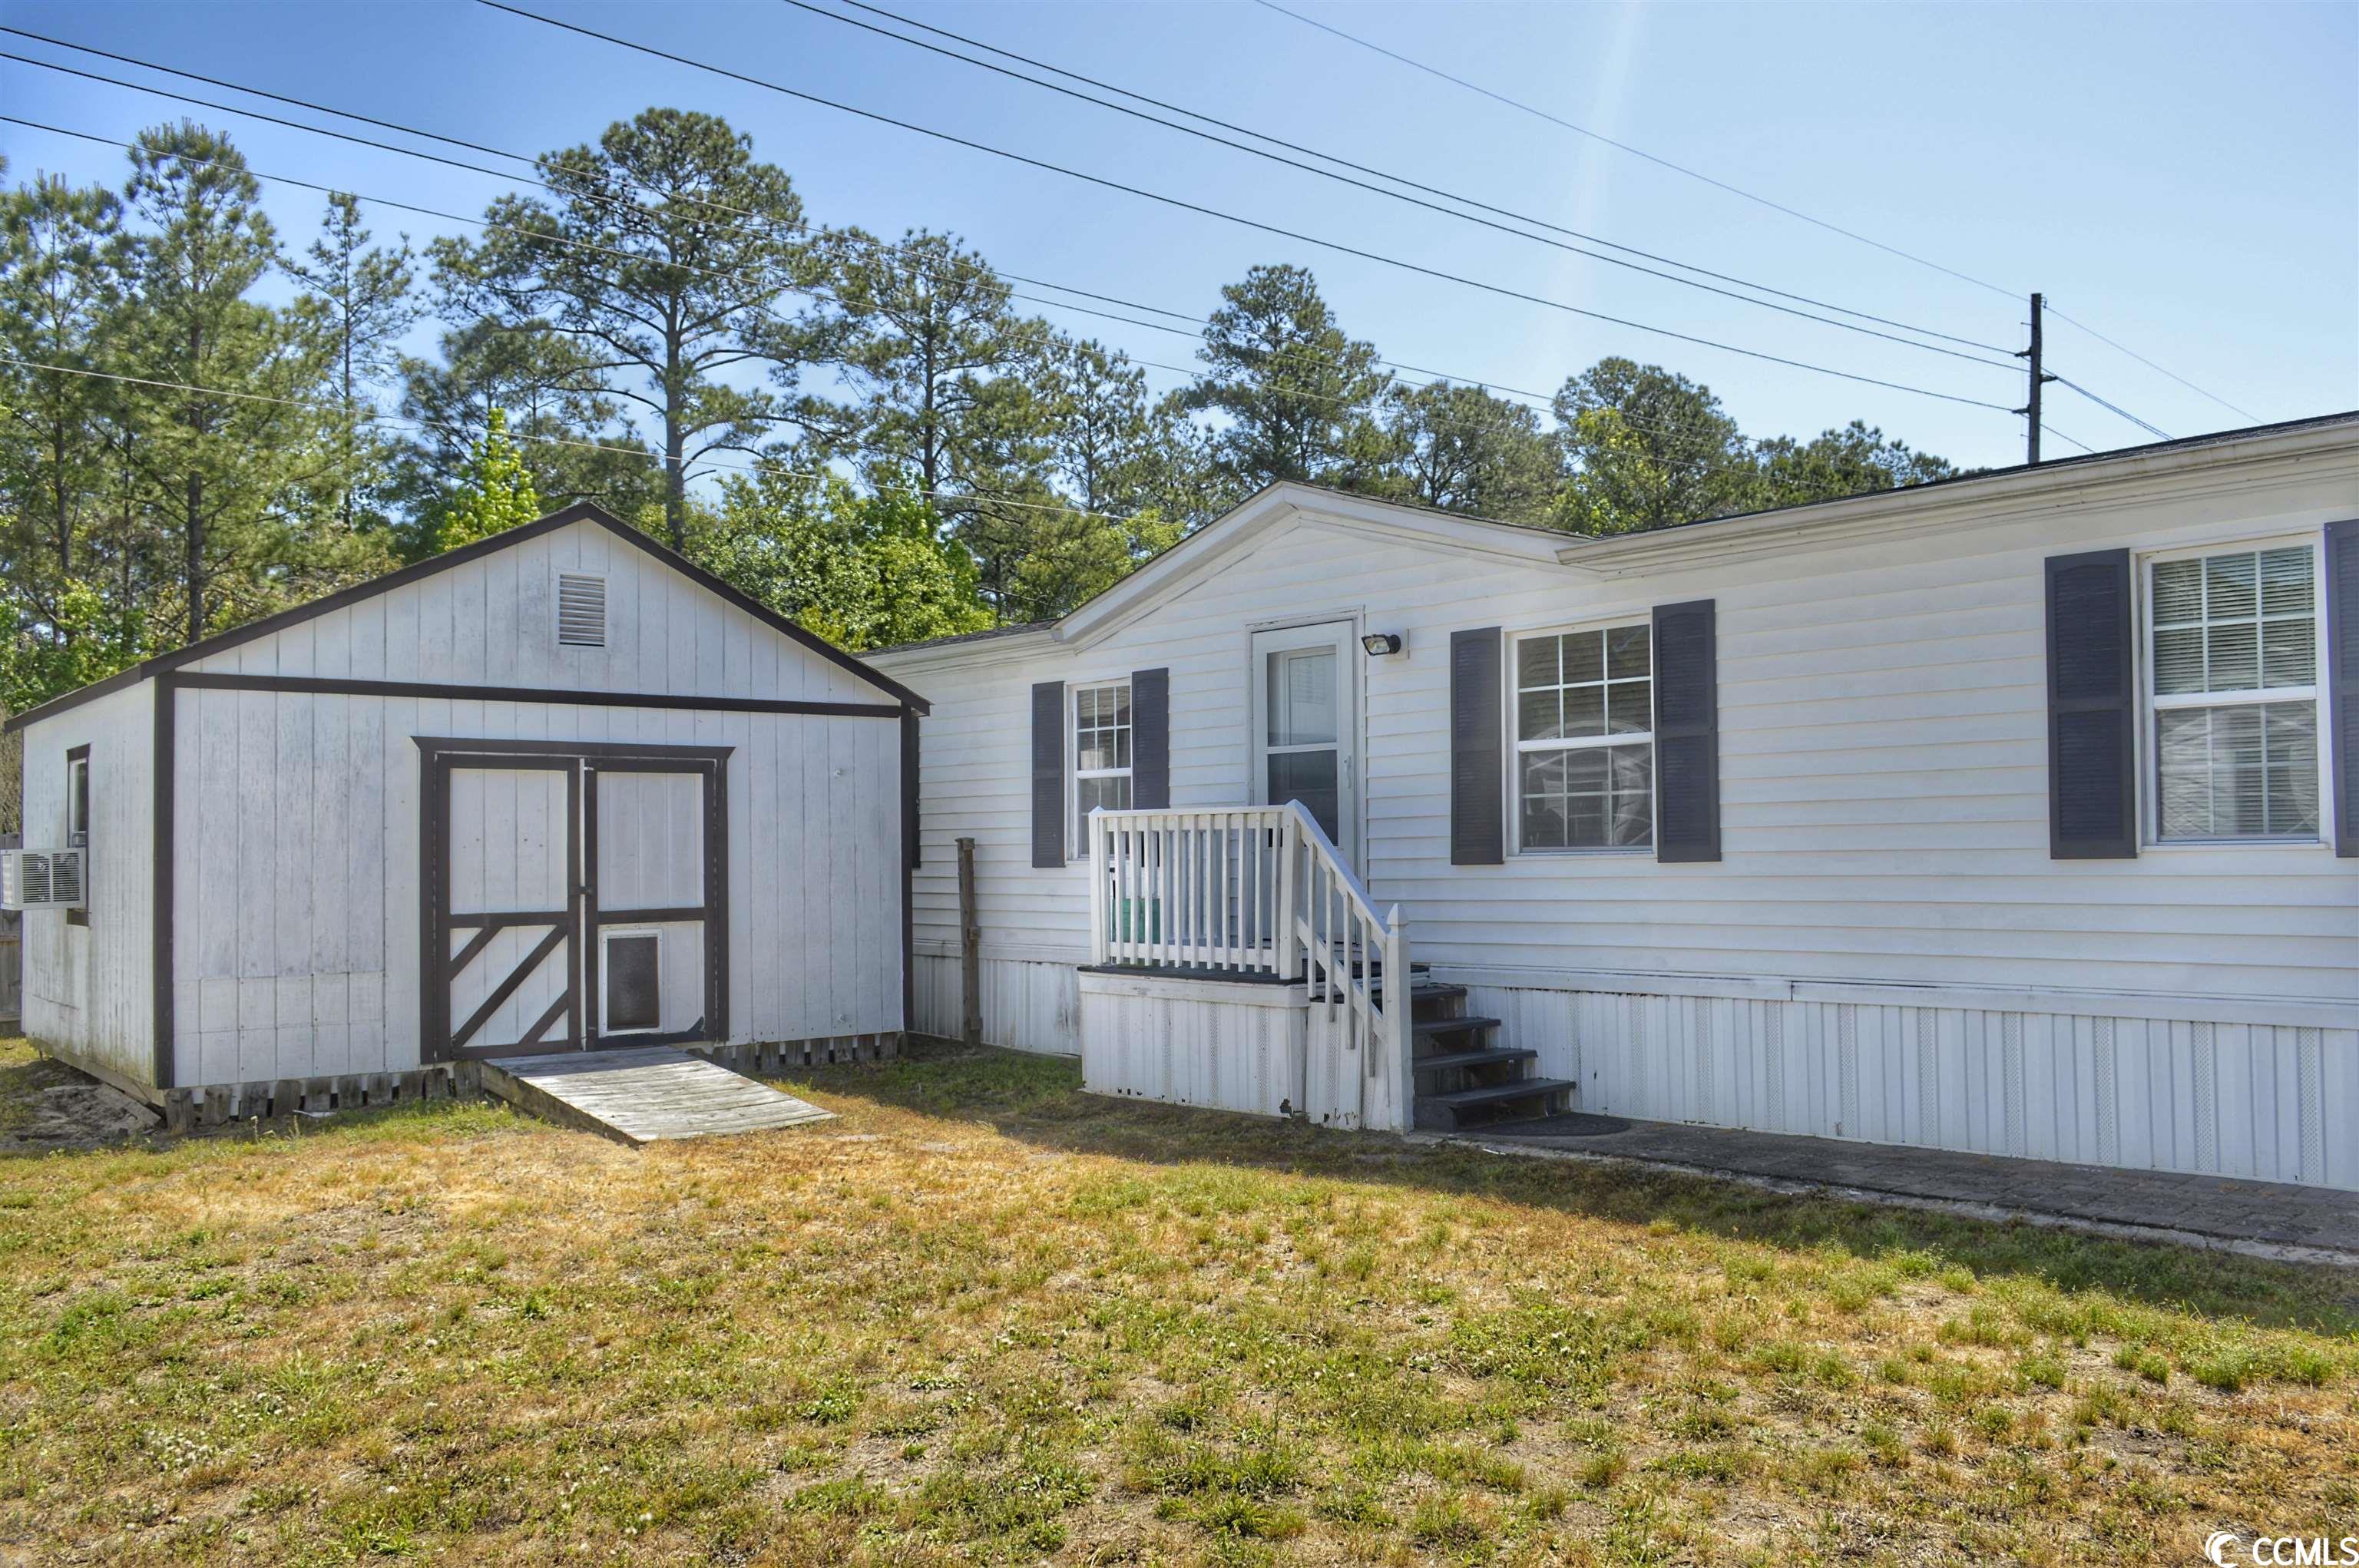 576 Southern Pines Dr. Myrtle Beach, SC 29579